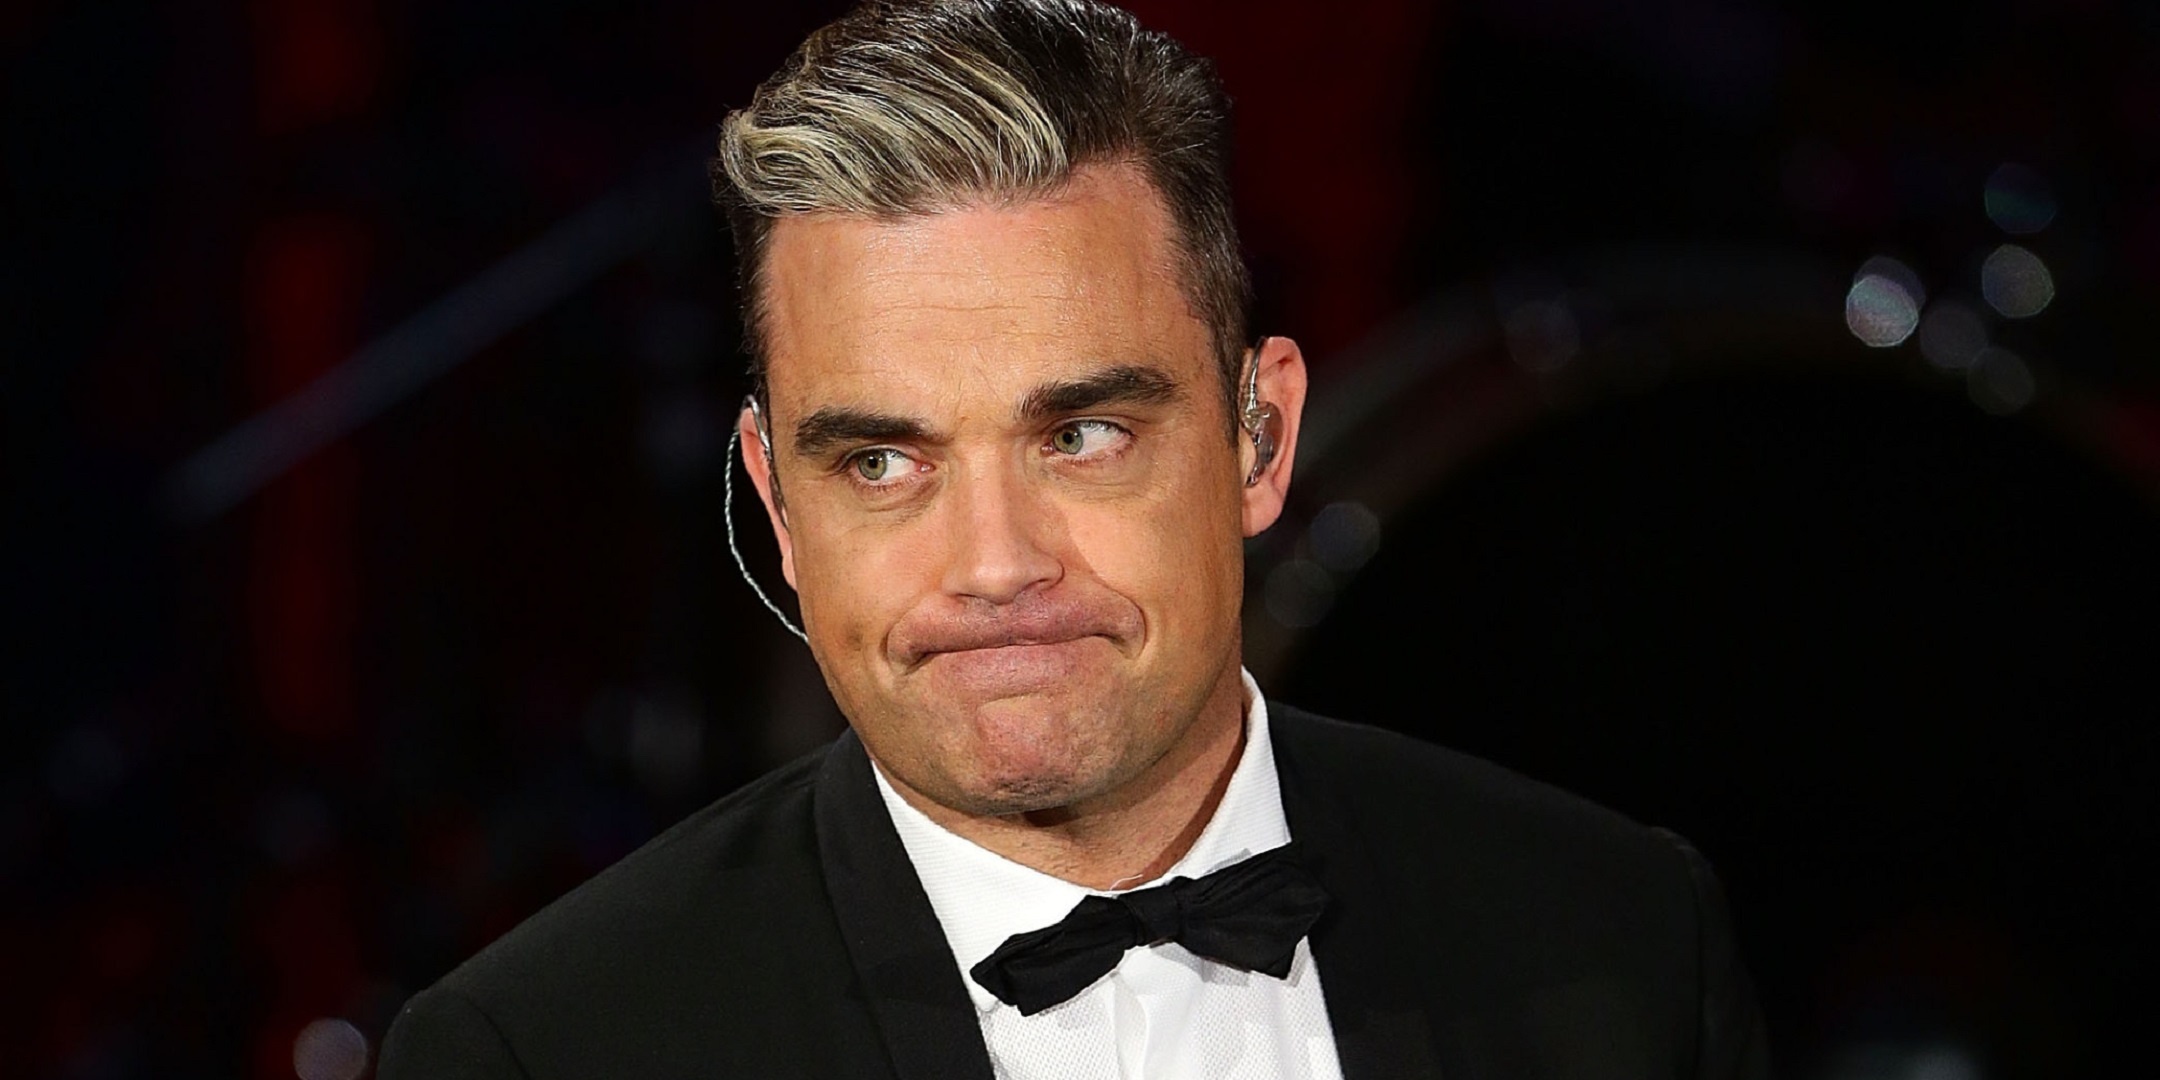 Robbie Williams, Free download high definition wallpapers, 2160x1080 Dual Screen Desktop